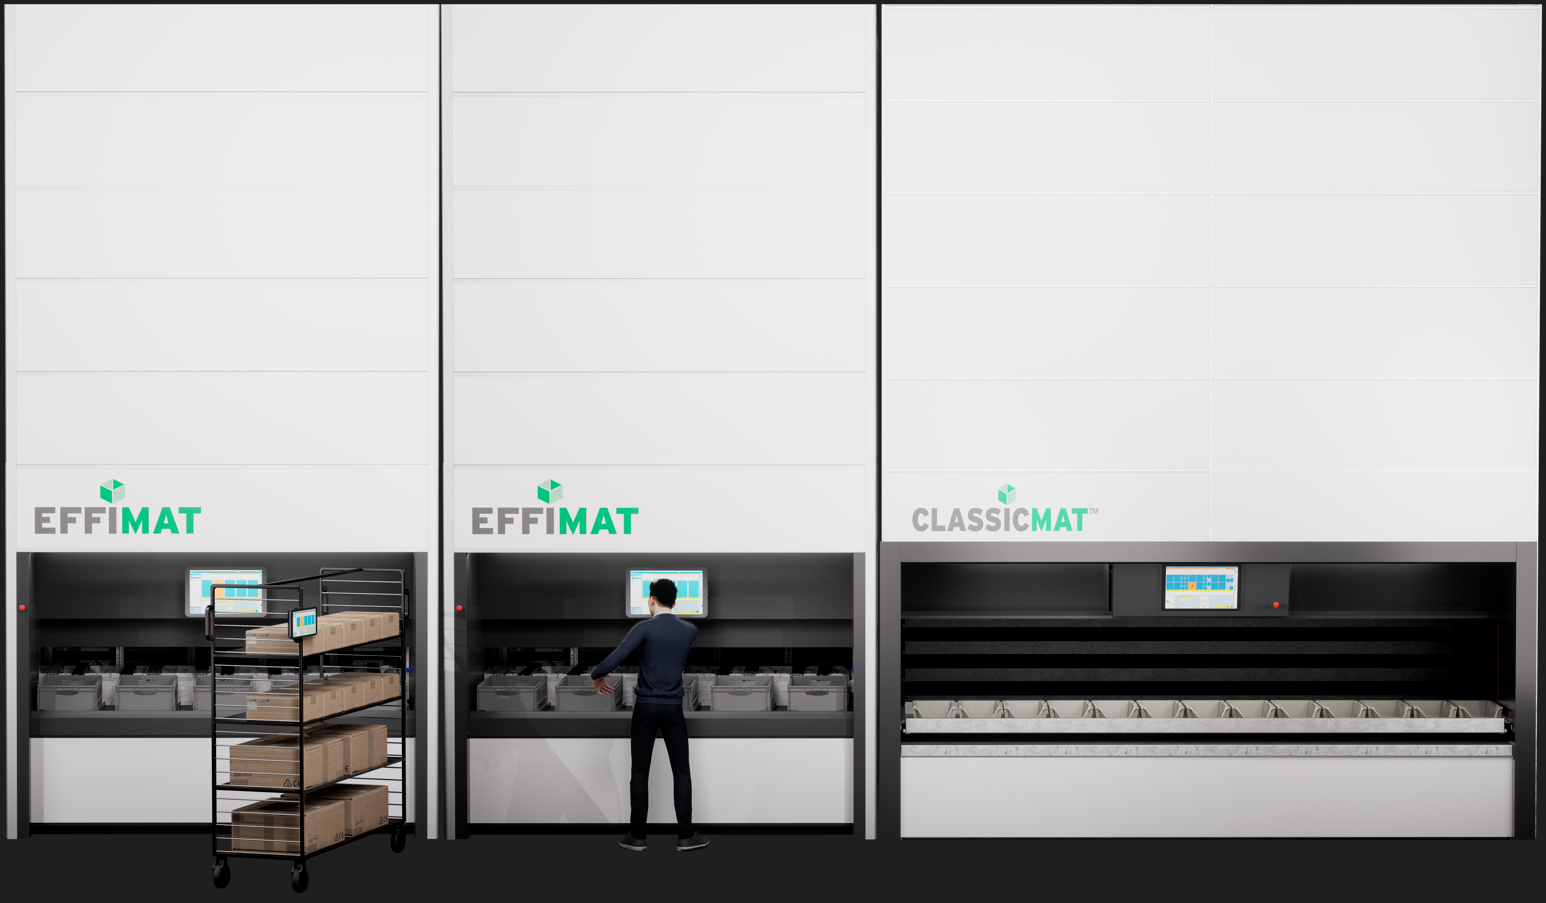 The EffiMat and ClassicMat hybrid